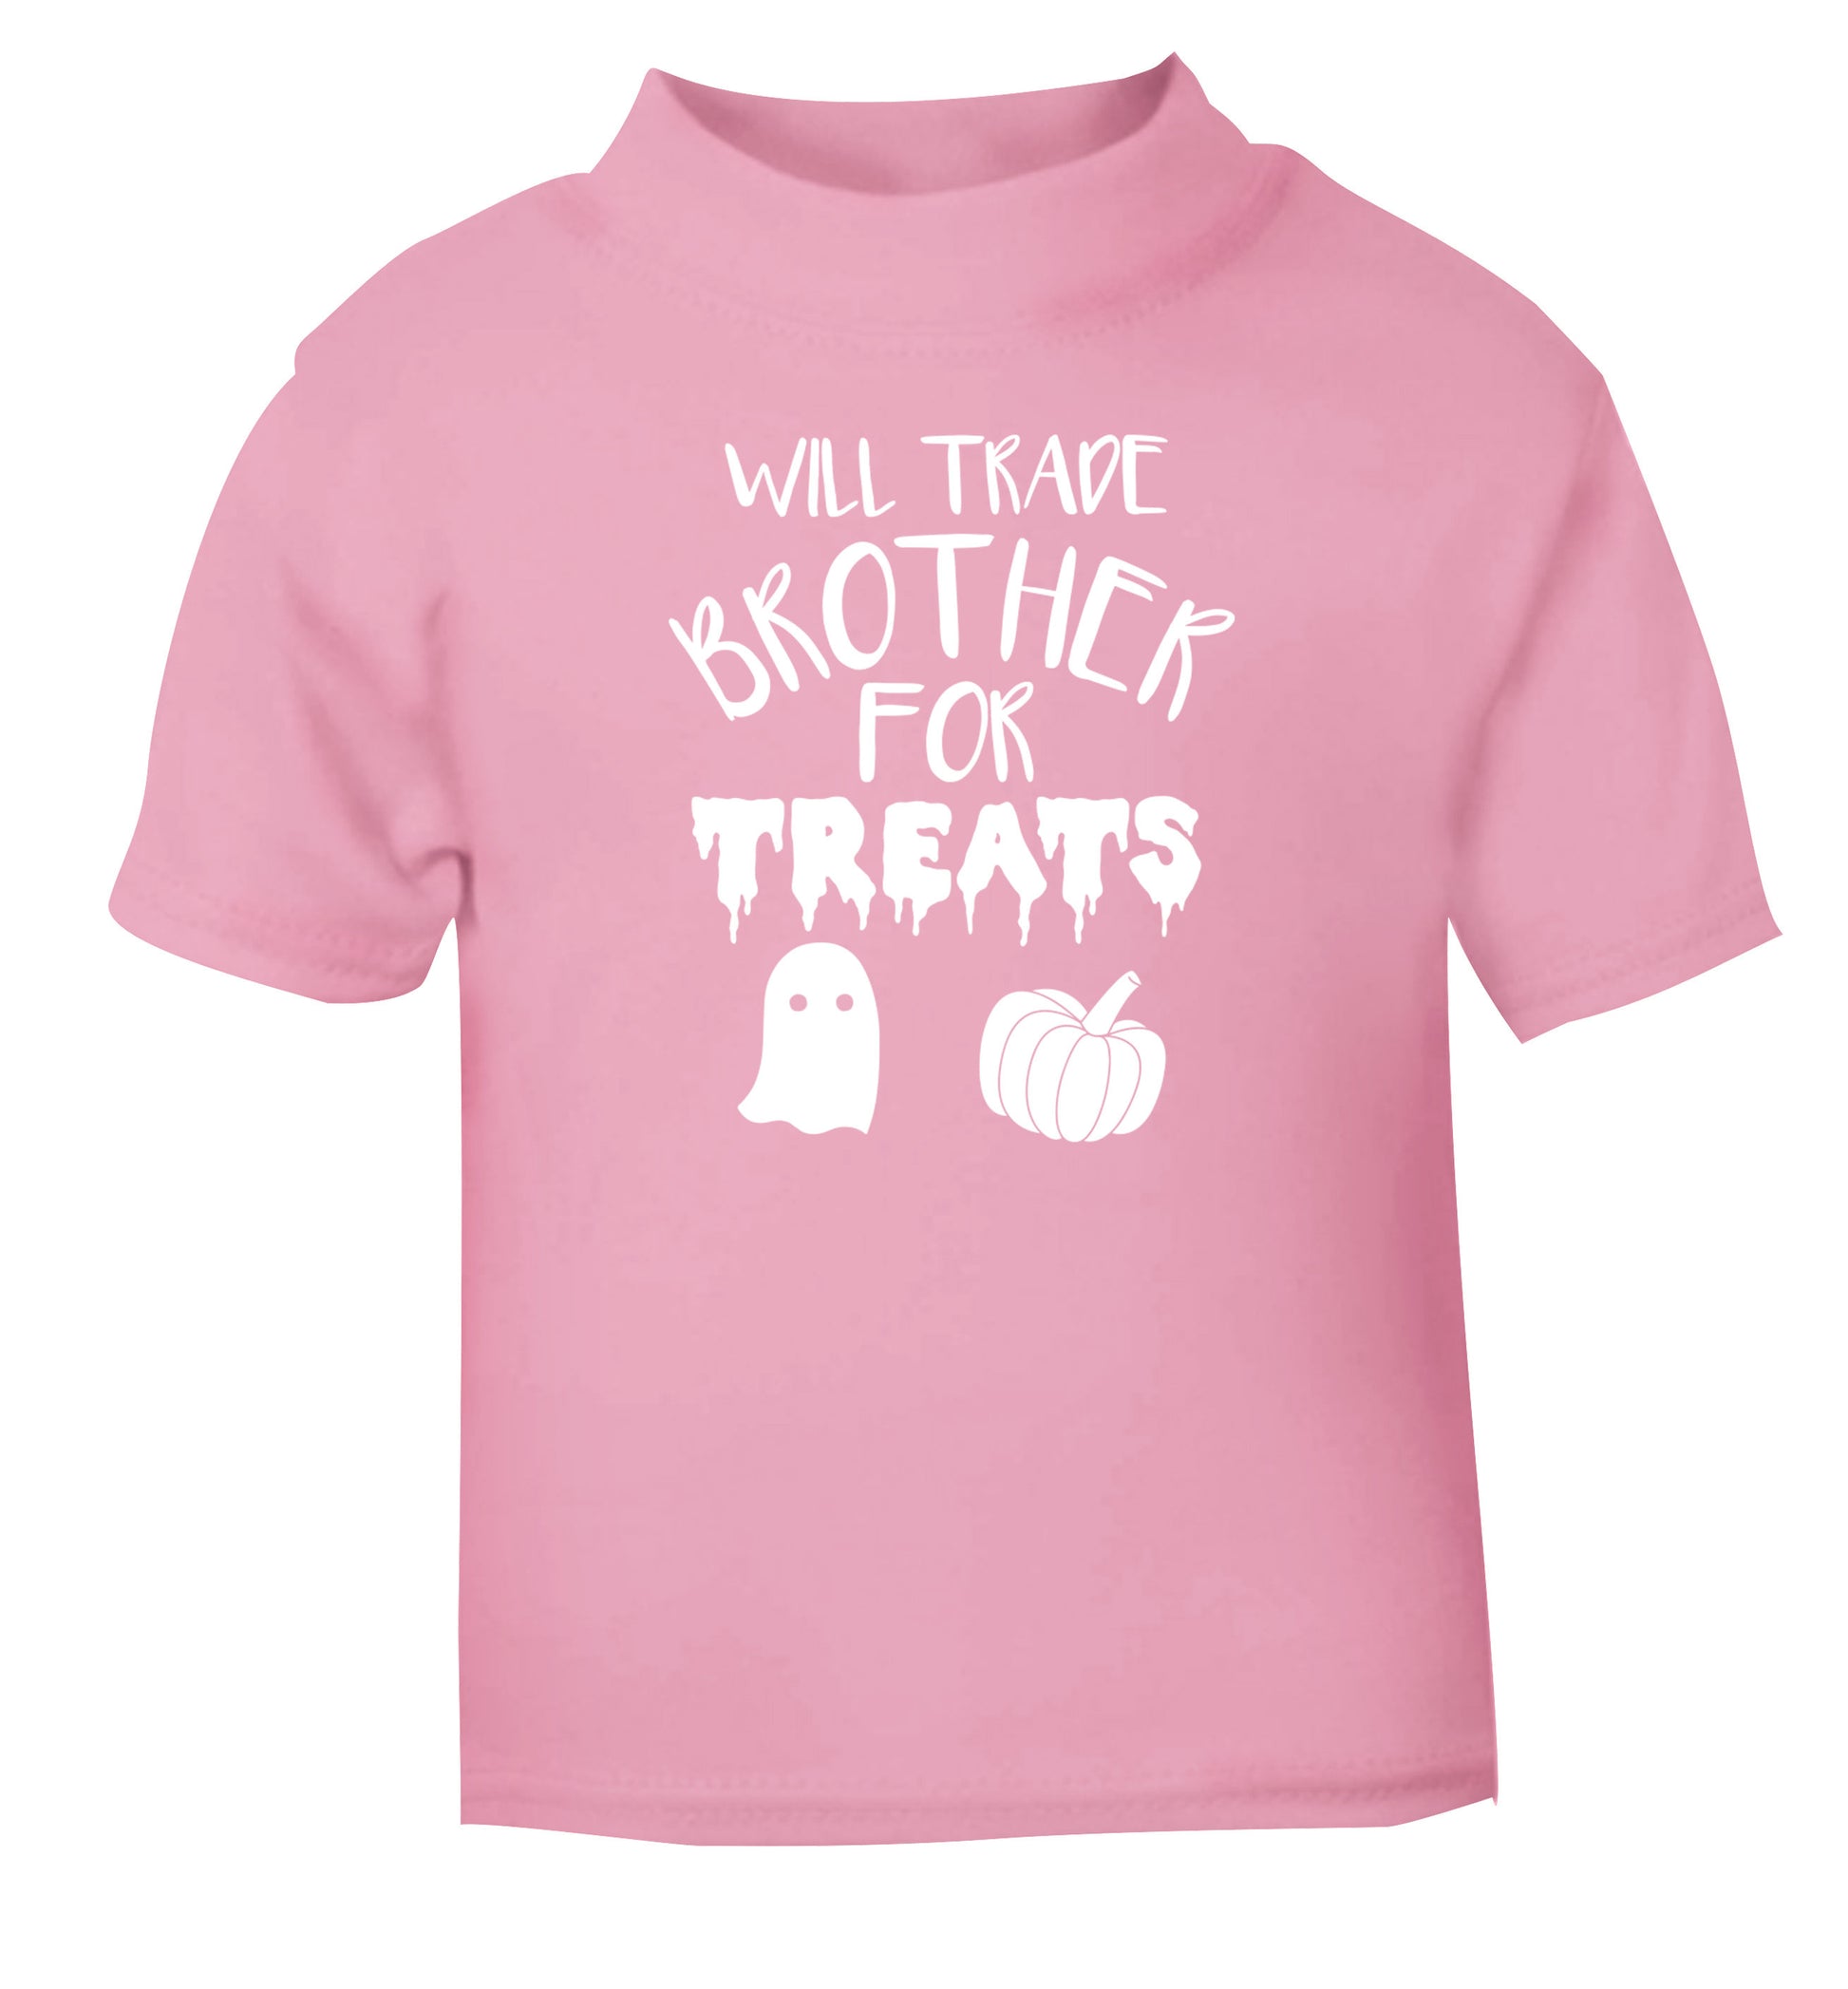 Will trade brother for treats light pink Baby Toddler Tshirt 2 Years